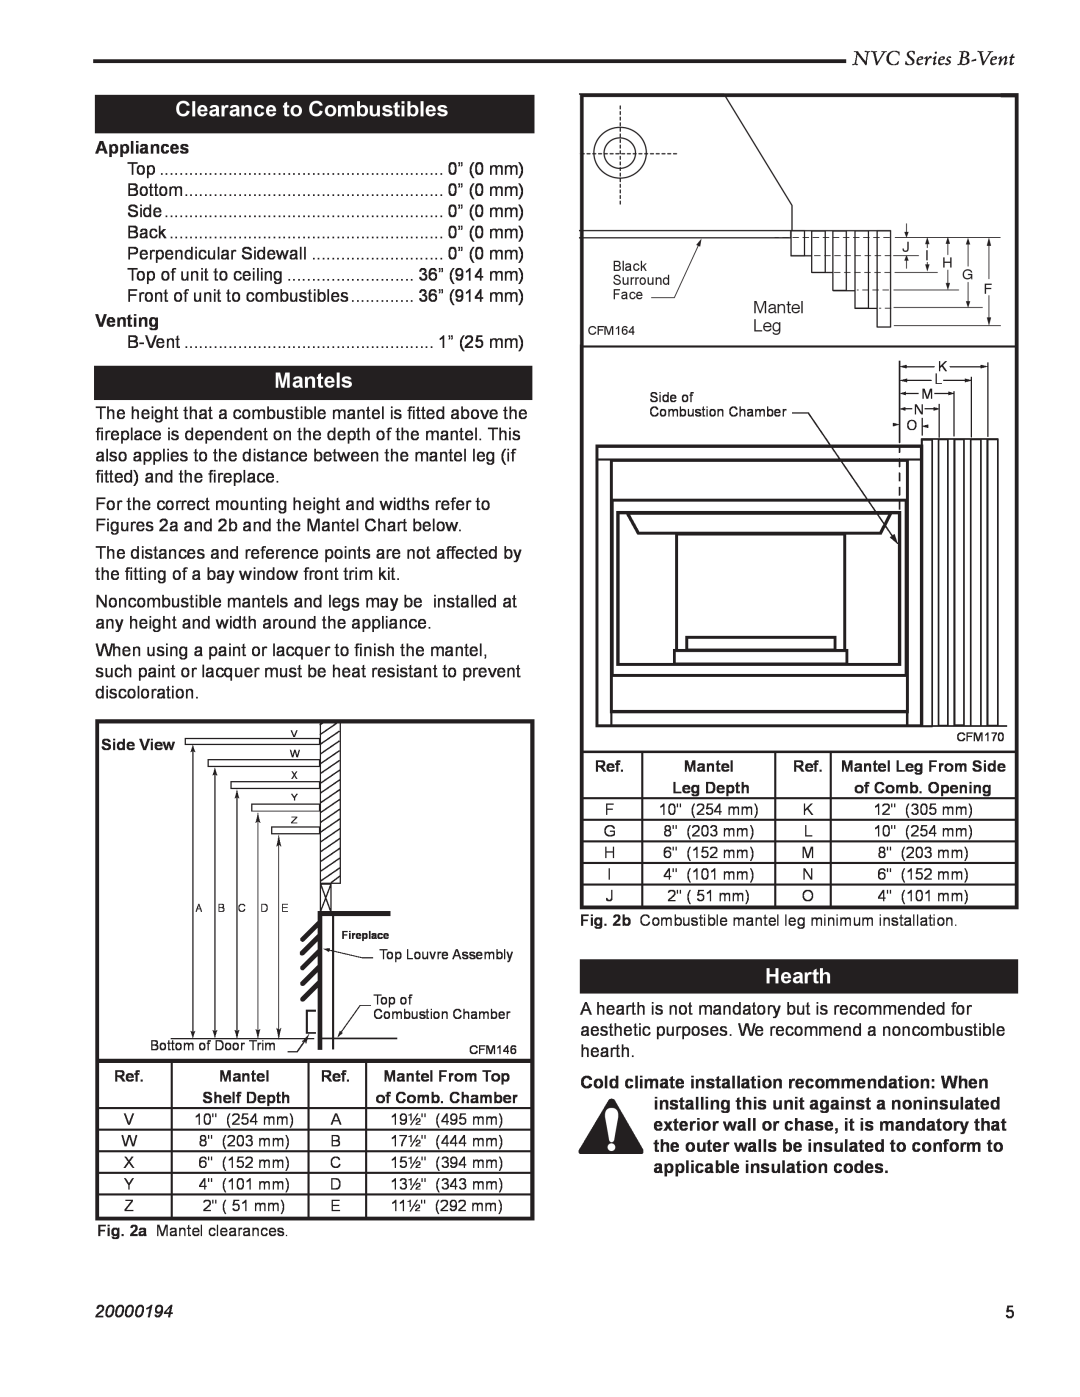 Vermont Casting NVC39, NVC36 Clearance to Combustibles, Mantels, Hearth, NVC Series B-Vent, Appliances, Venting, 20000194 